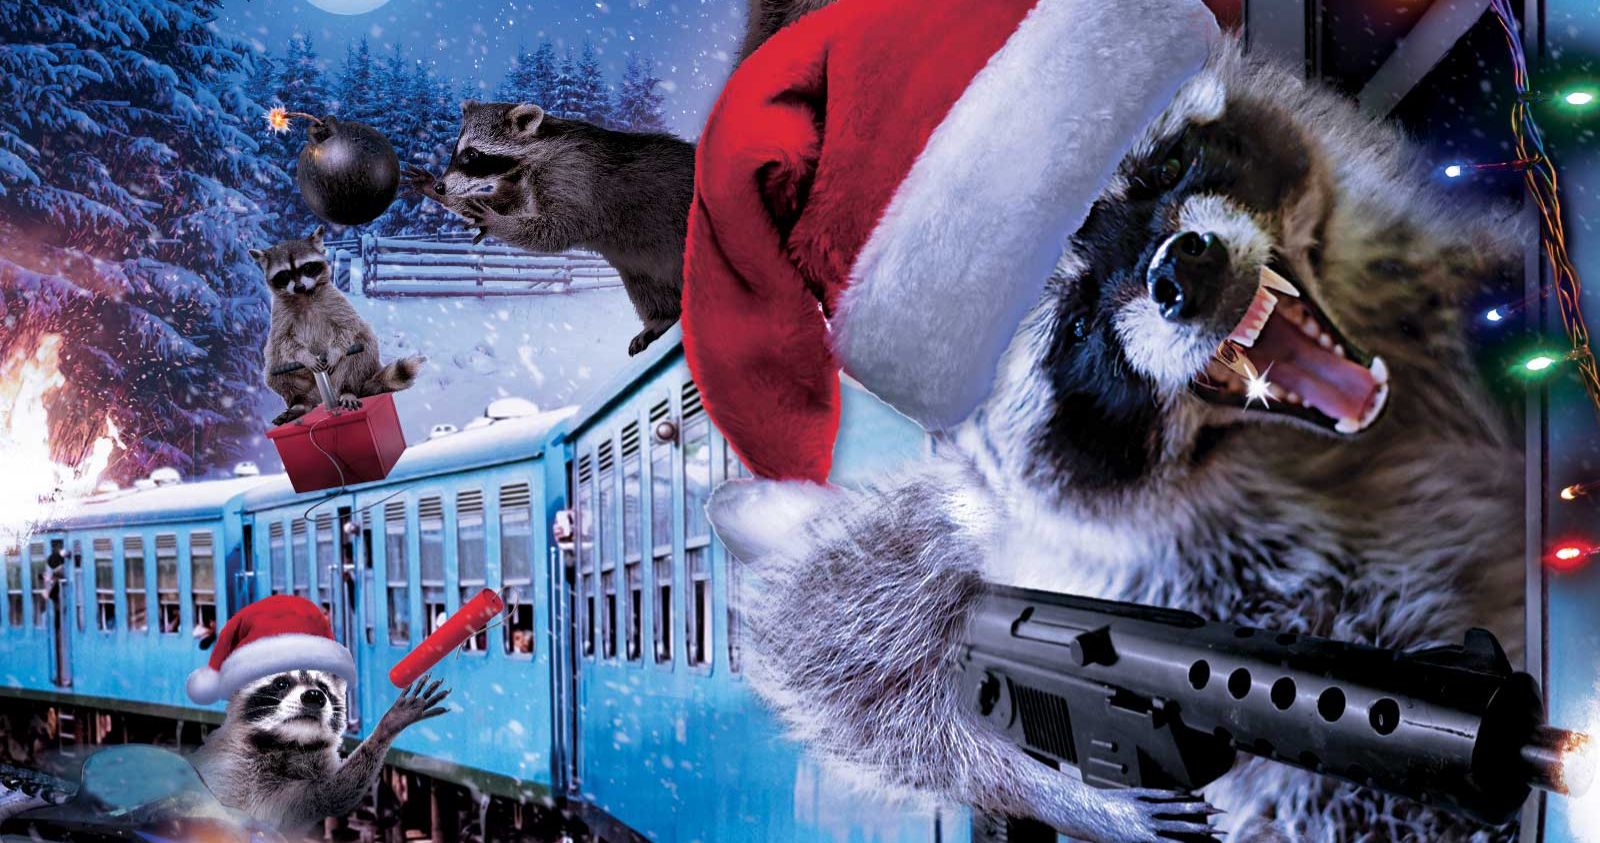 Killer Raccoons! 2! Trailer Is Exactly What We Need Right Now